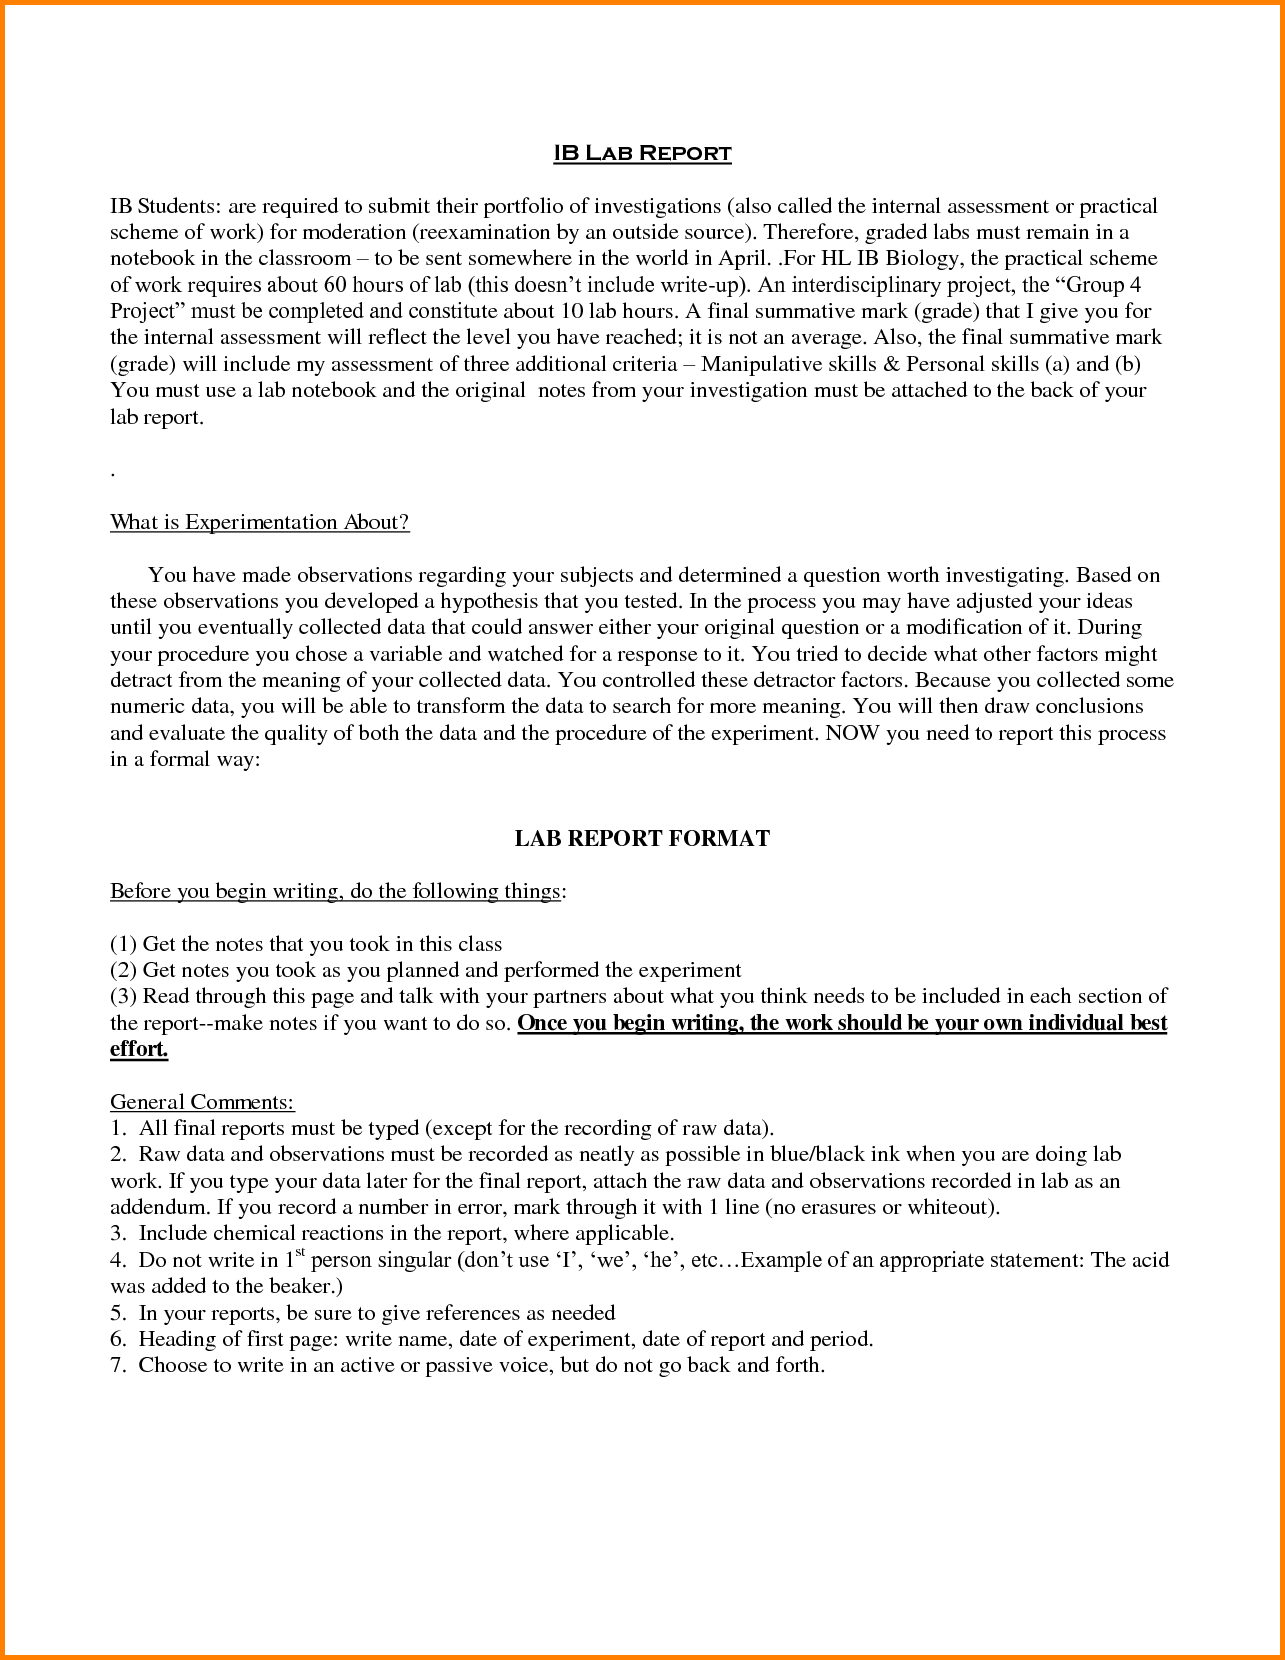 Incident Management Report Samples And 11 Biology Lab Report For Biology Lab Report Template